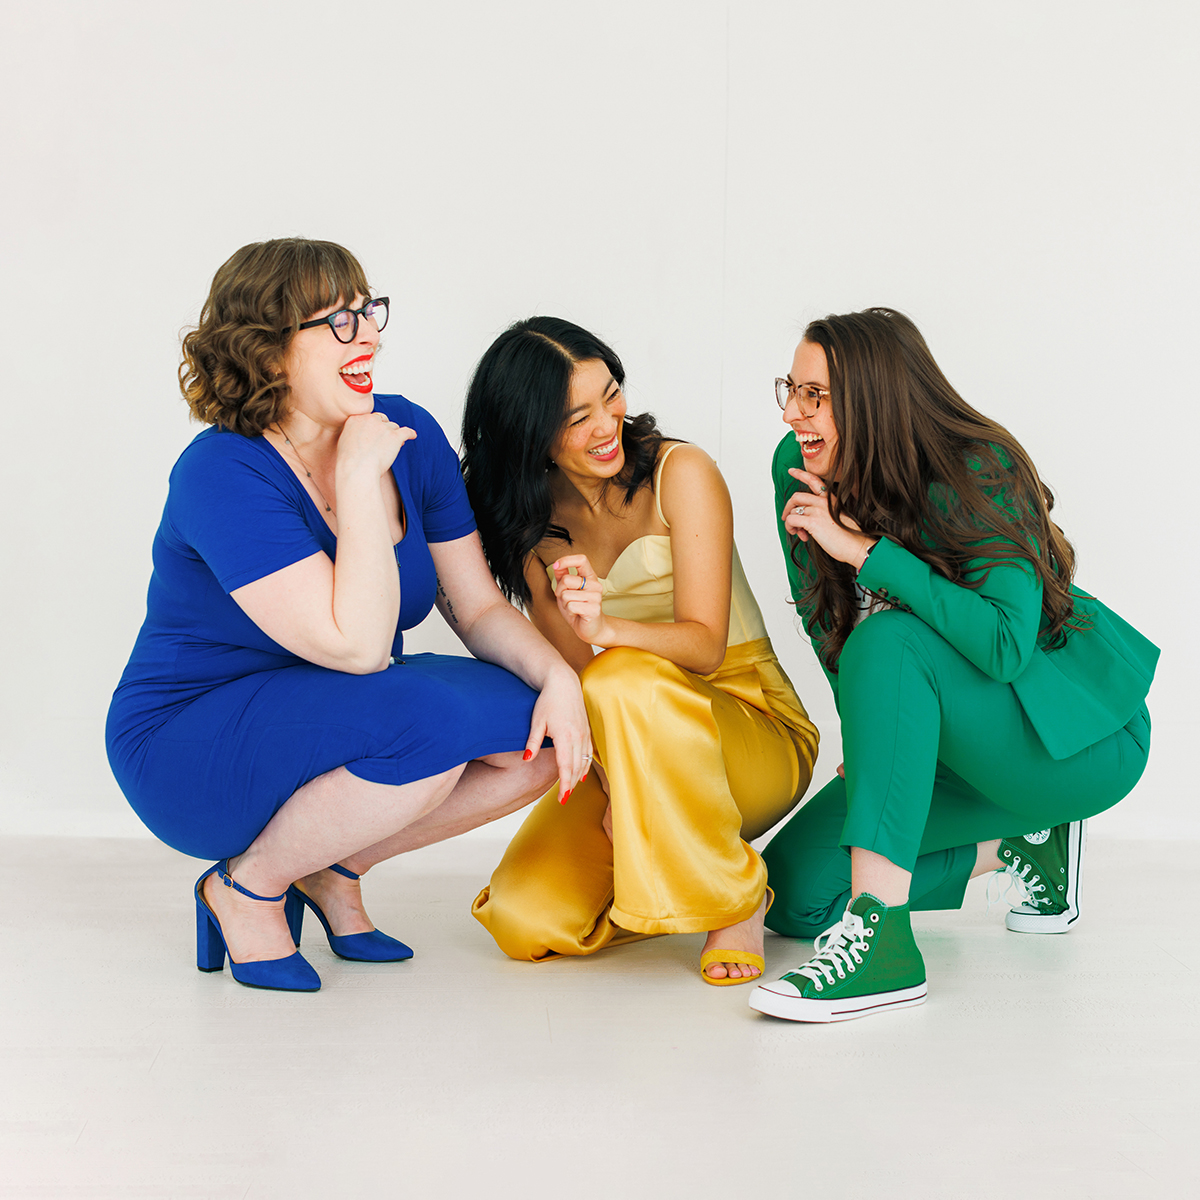 Photo of the Rendezvous Creative team crouched in laughter in a white room. Megan, in a blue dress, blue heels, and red lipstick laughs with her hand under her chin. Nicole, in yellow pants, leans back on her hand while laughing at Latasha on the right, who is dressed in a green suit and green Converse shoes.